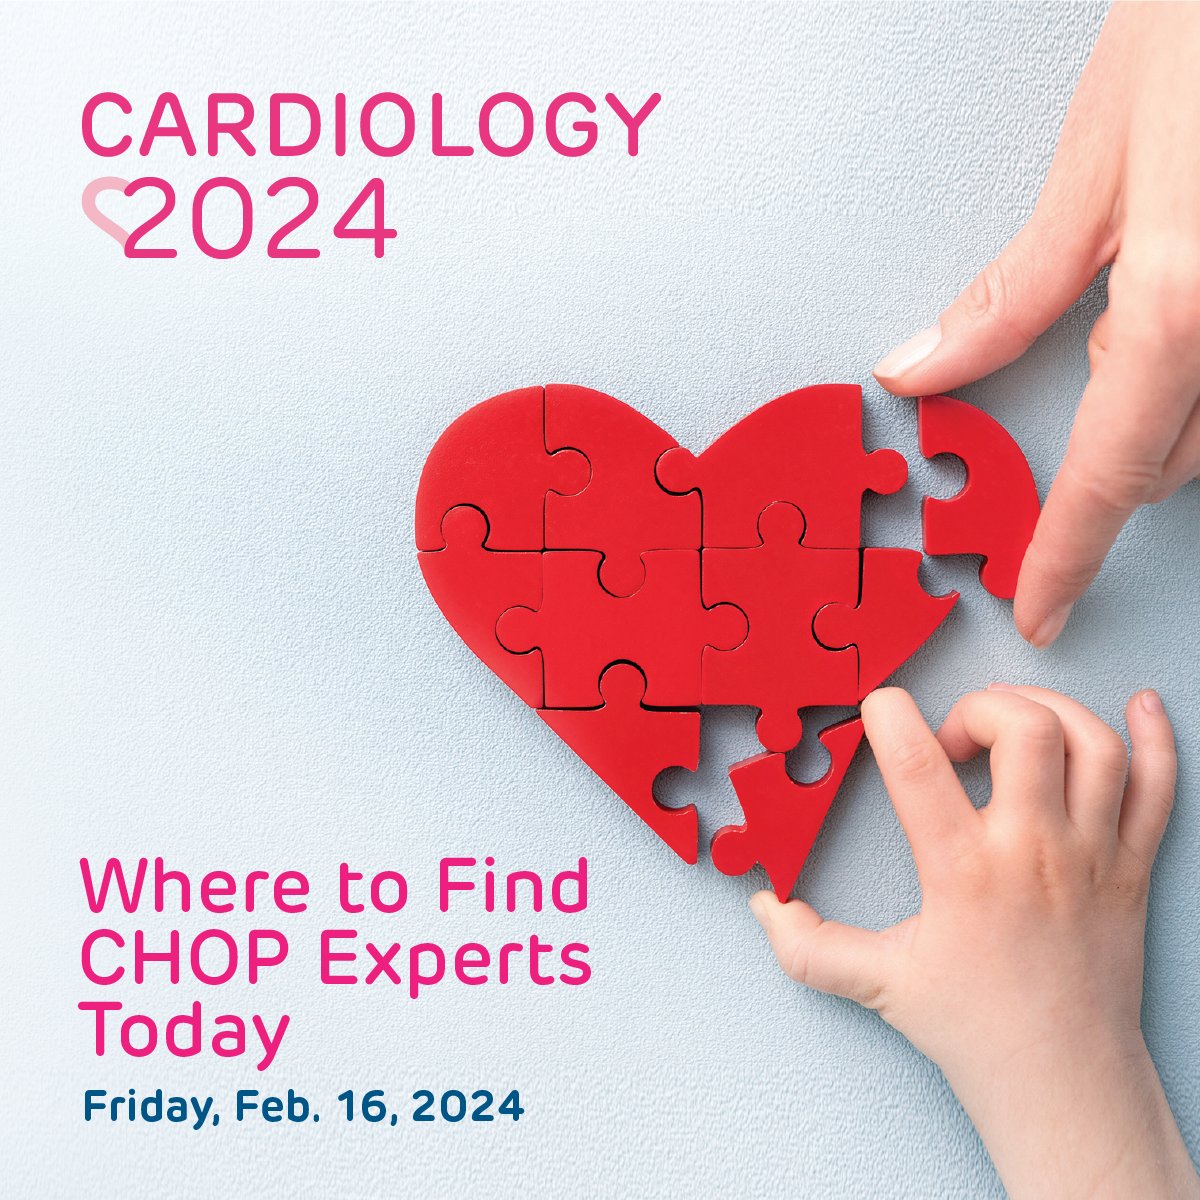 We’re back for another day of #Cardiology2024. Be sure to check out this morning’s Plenary Session highlighting Valves in Congenital Heart Disease. And see our schedule here: ms.spr.ly/6013cE4Bl